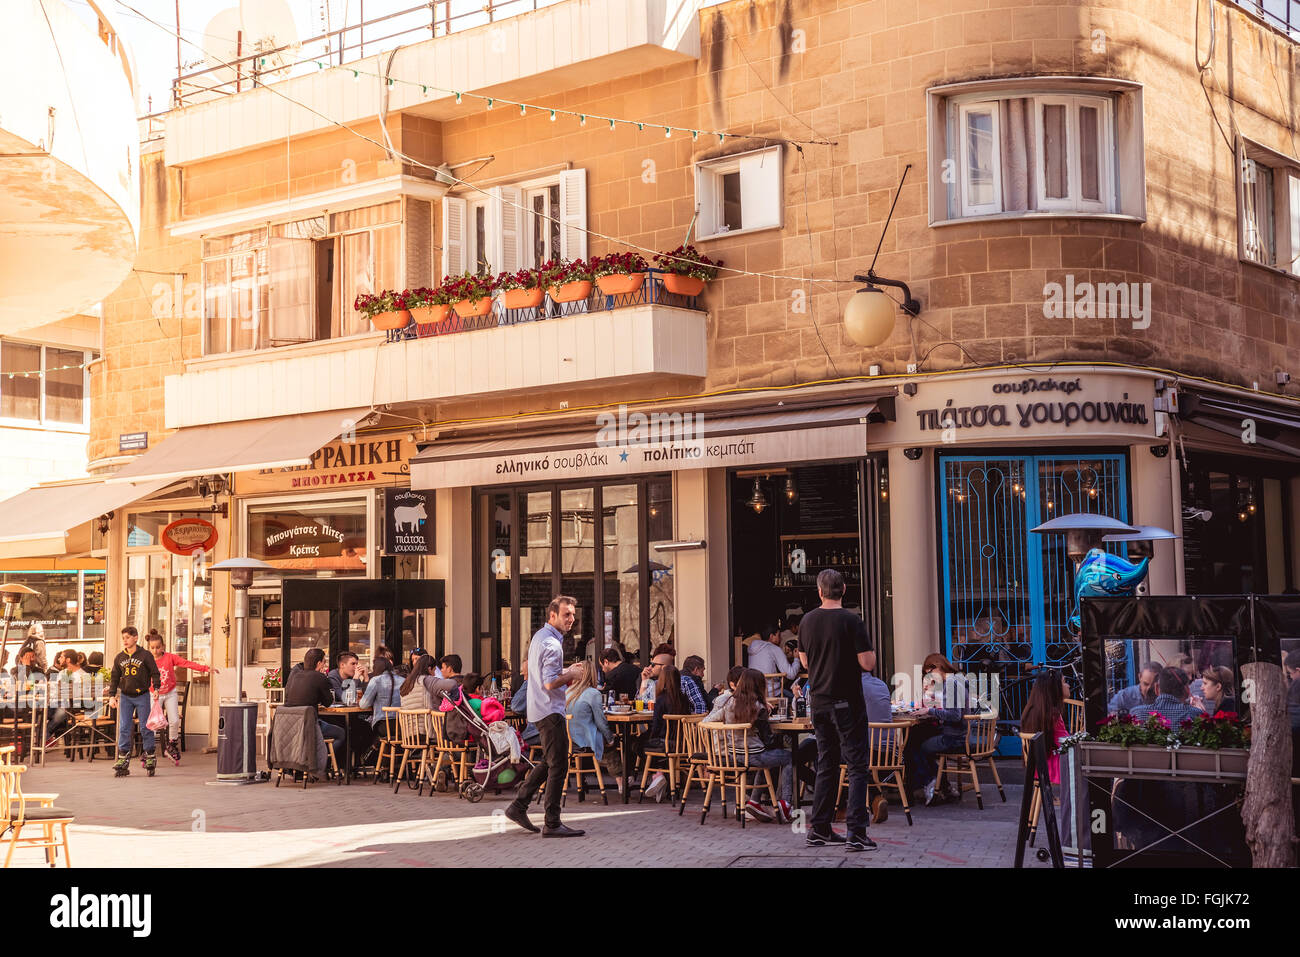 NICOSIA - APRIL 13 : People in restaurants and traditional coffee shops at Faneromenis street on April 13, 2015 in Nicosia, Cypr Stock Photo